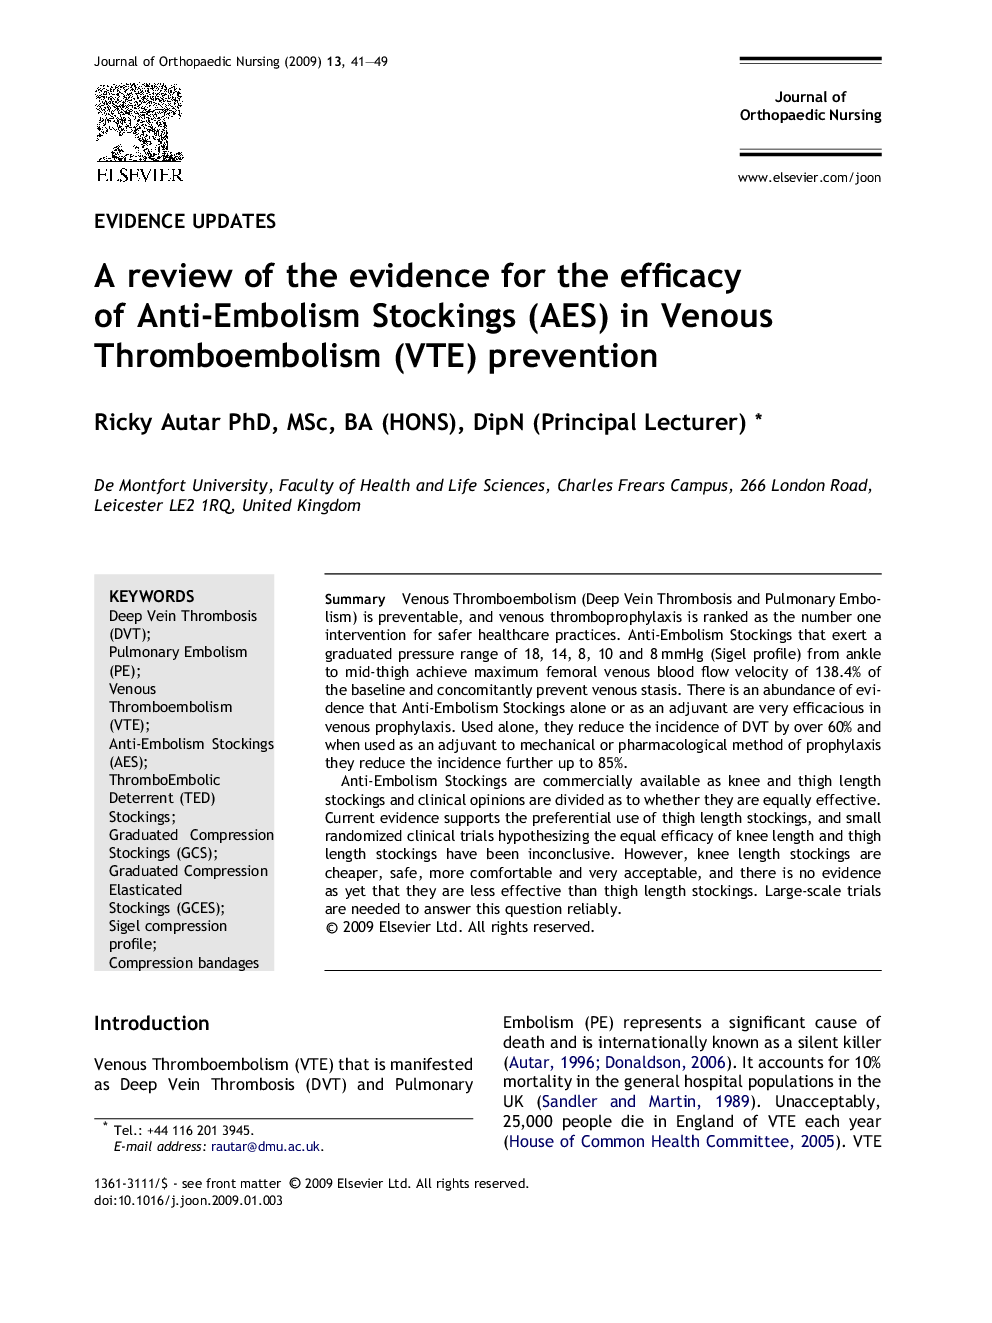 A review of the evidence for the efficacy of Anti-Embolism Stockings (AES) in Venous Thromboembolism (VTE) prevention